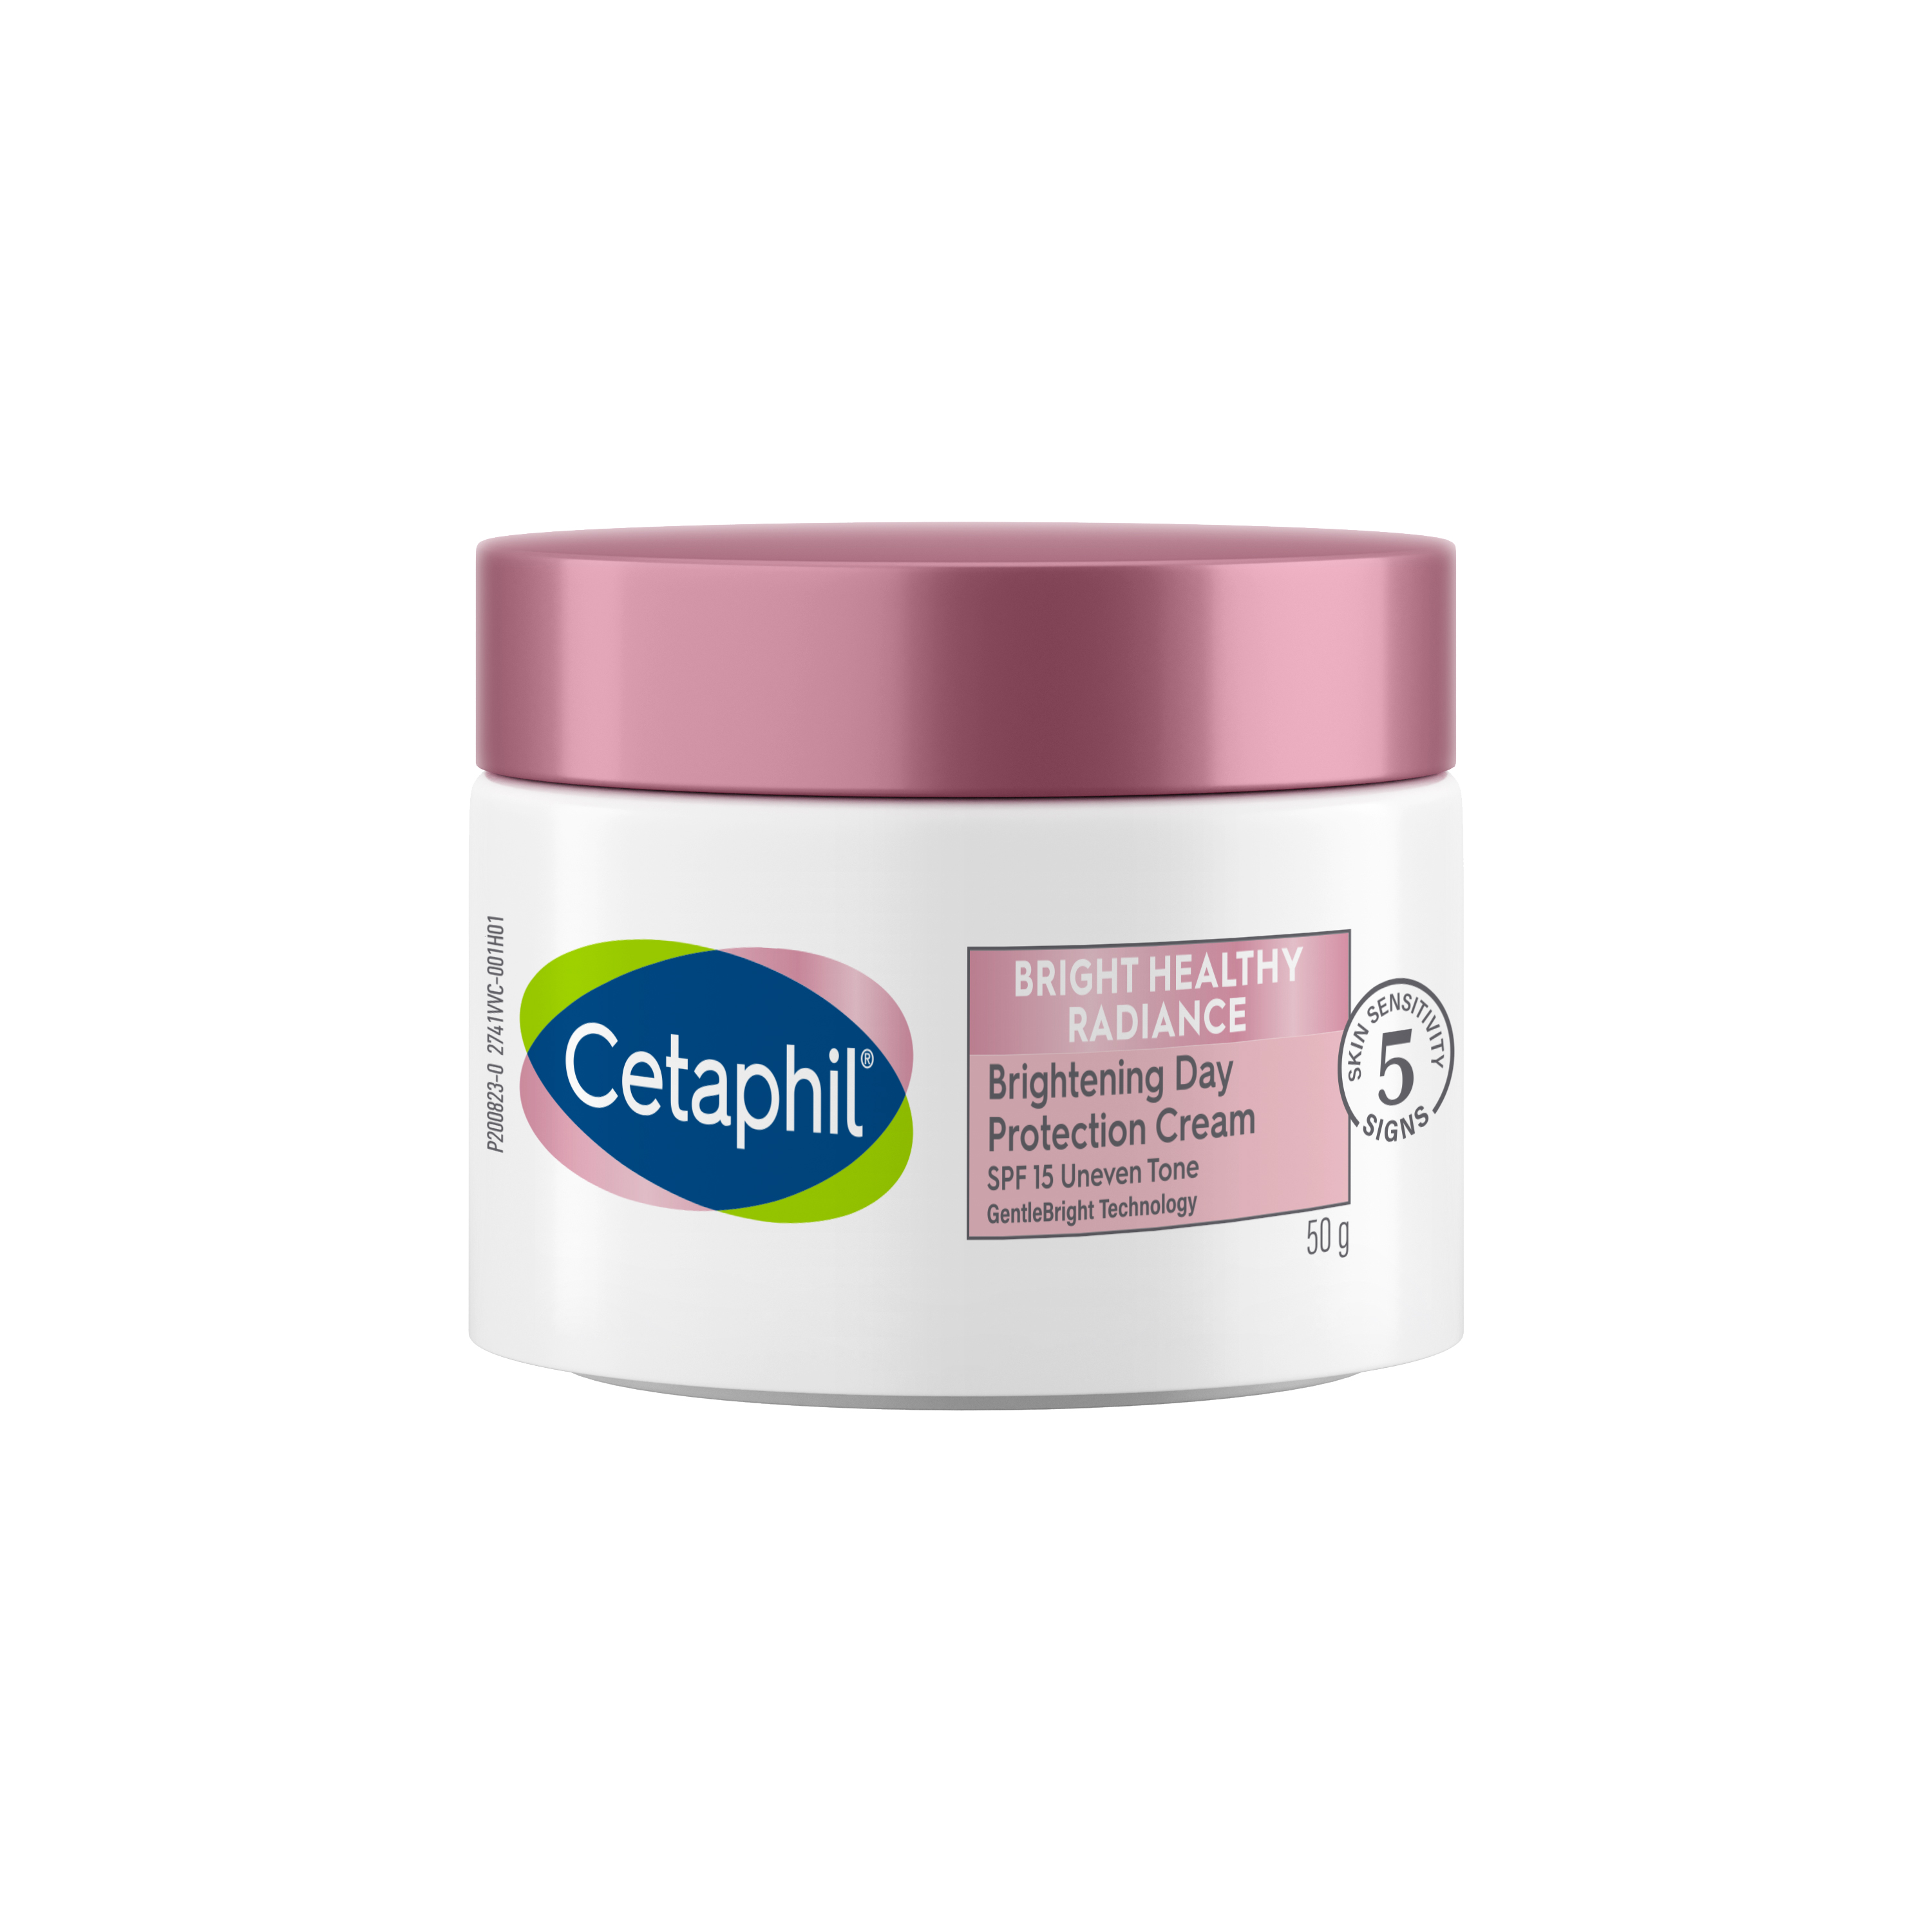 BRIGHT HEALTHY RADIANCE BRIGHTENING DAY PROTECTION CREAM